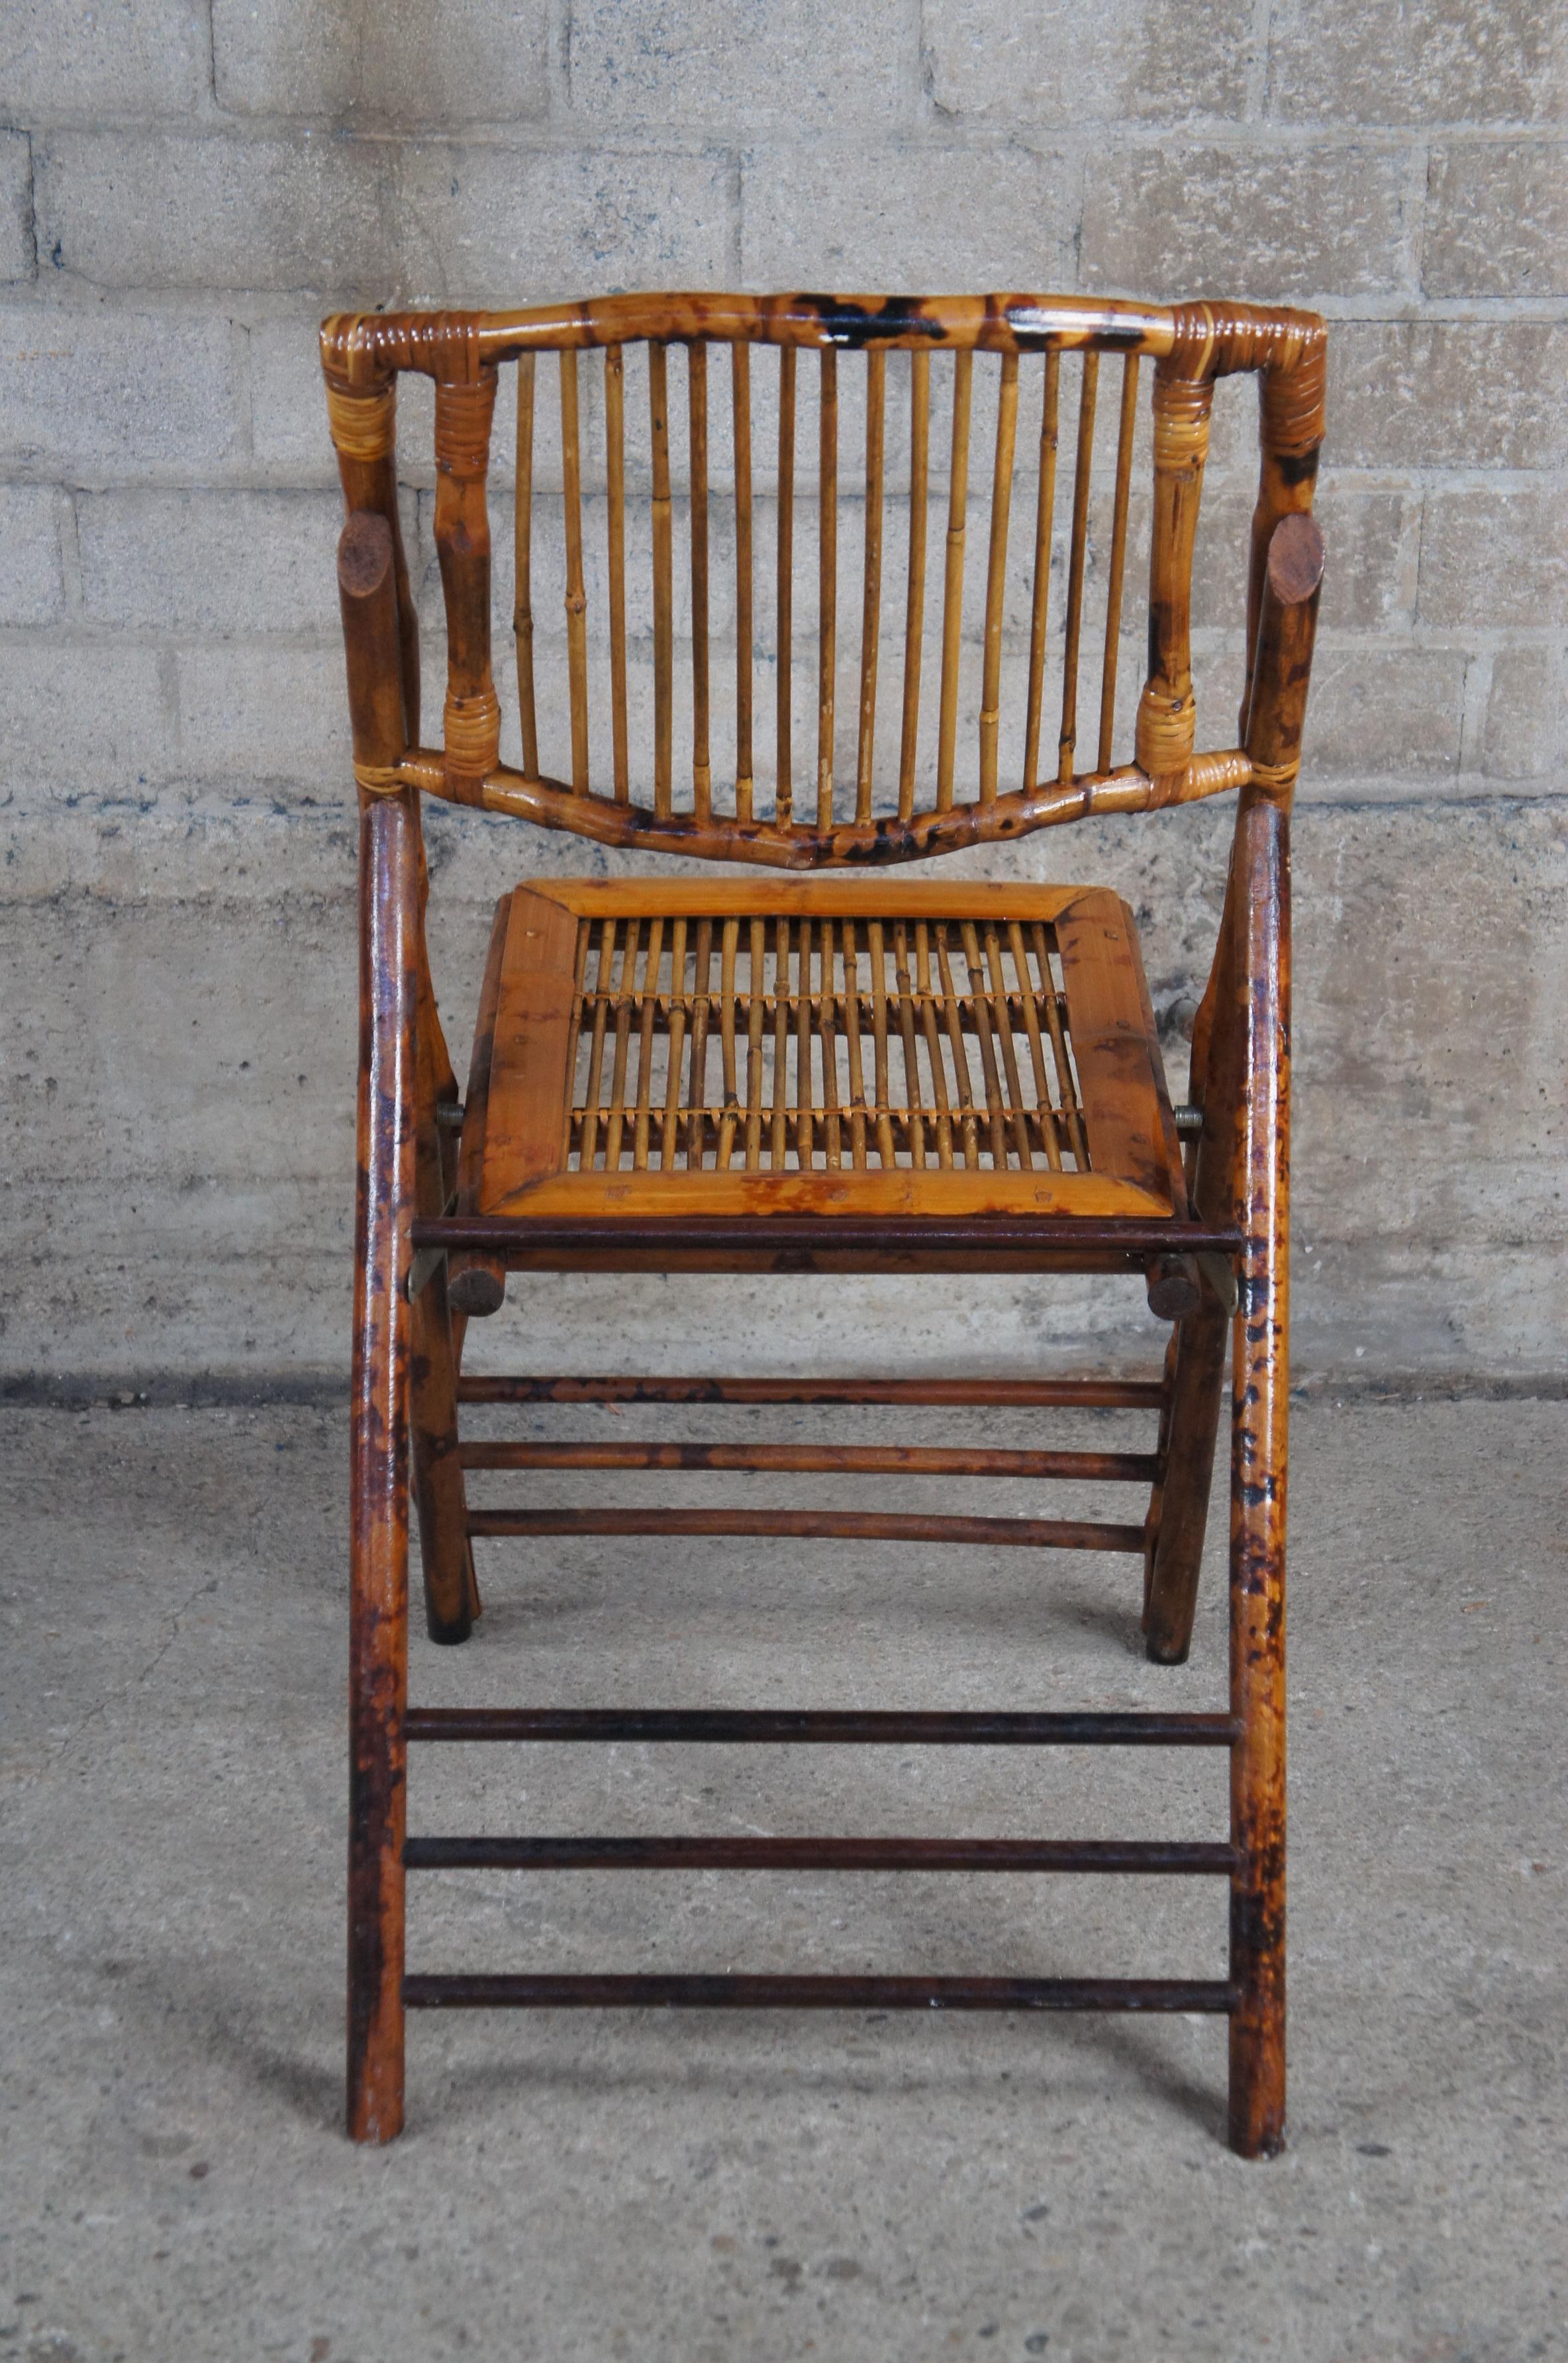 4 English Midcentury Scorched Bamboo & Rattan Folding Side Chairs Slatted Backs In Good Condition For Sale In Dayton, OH